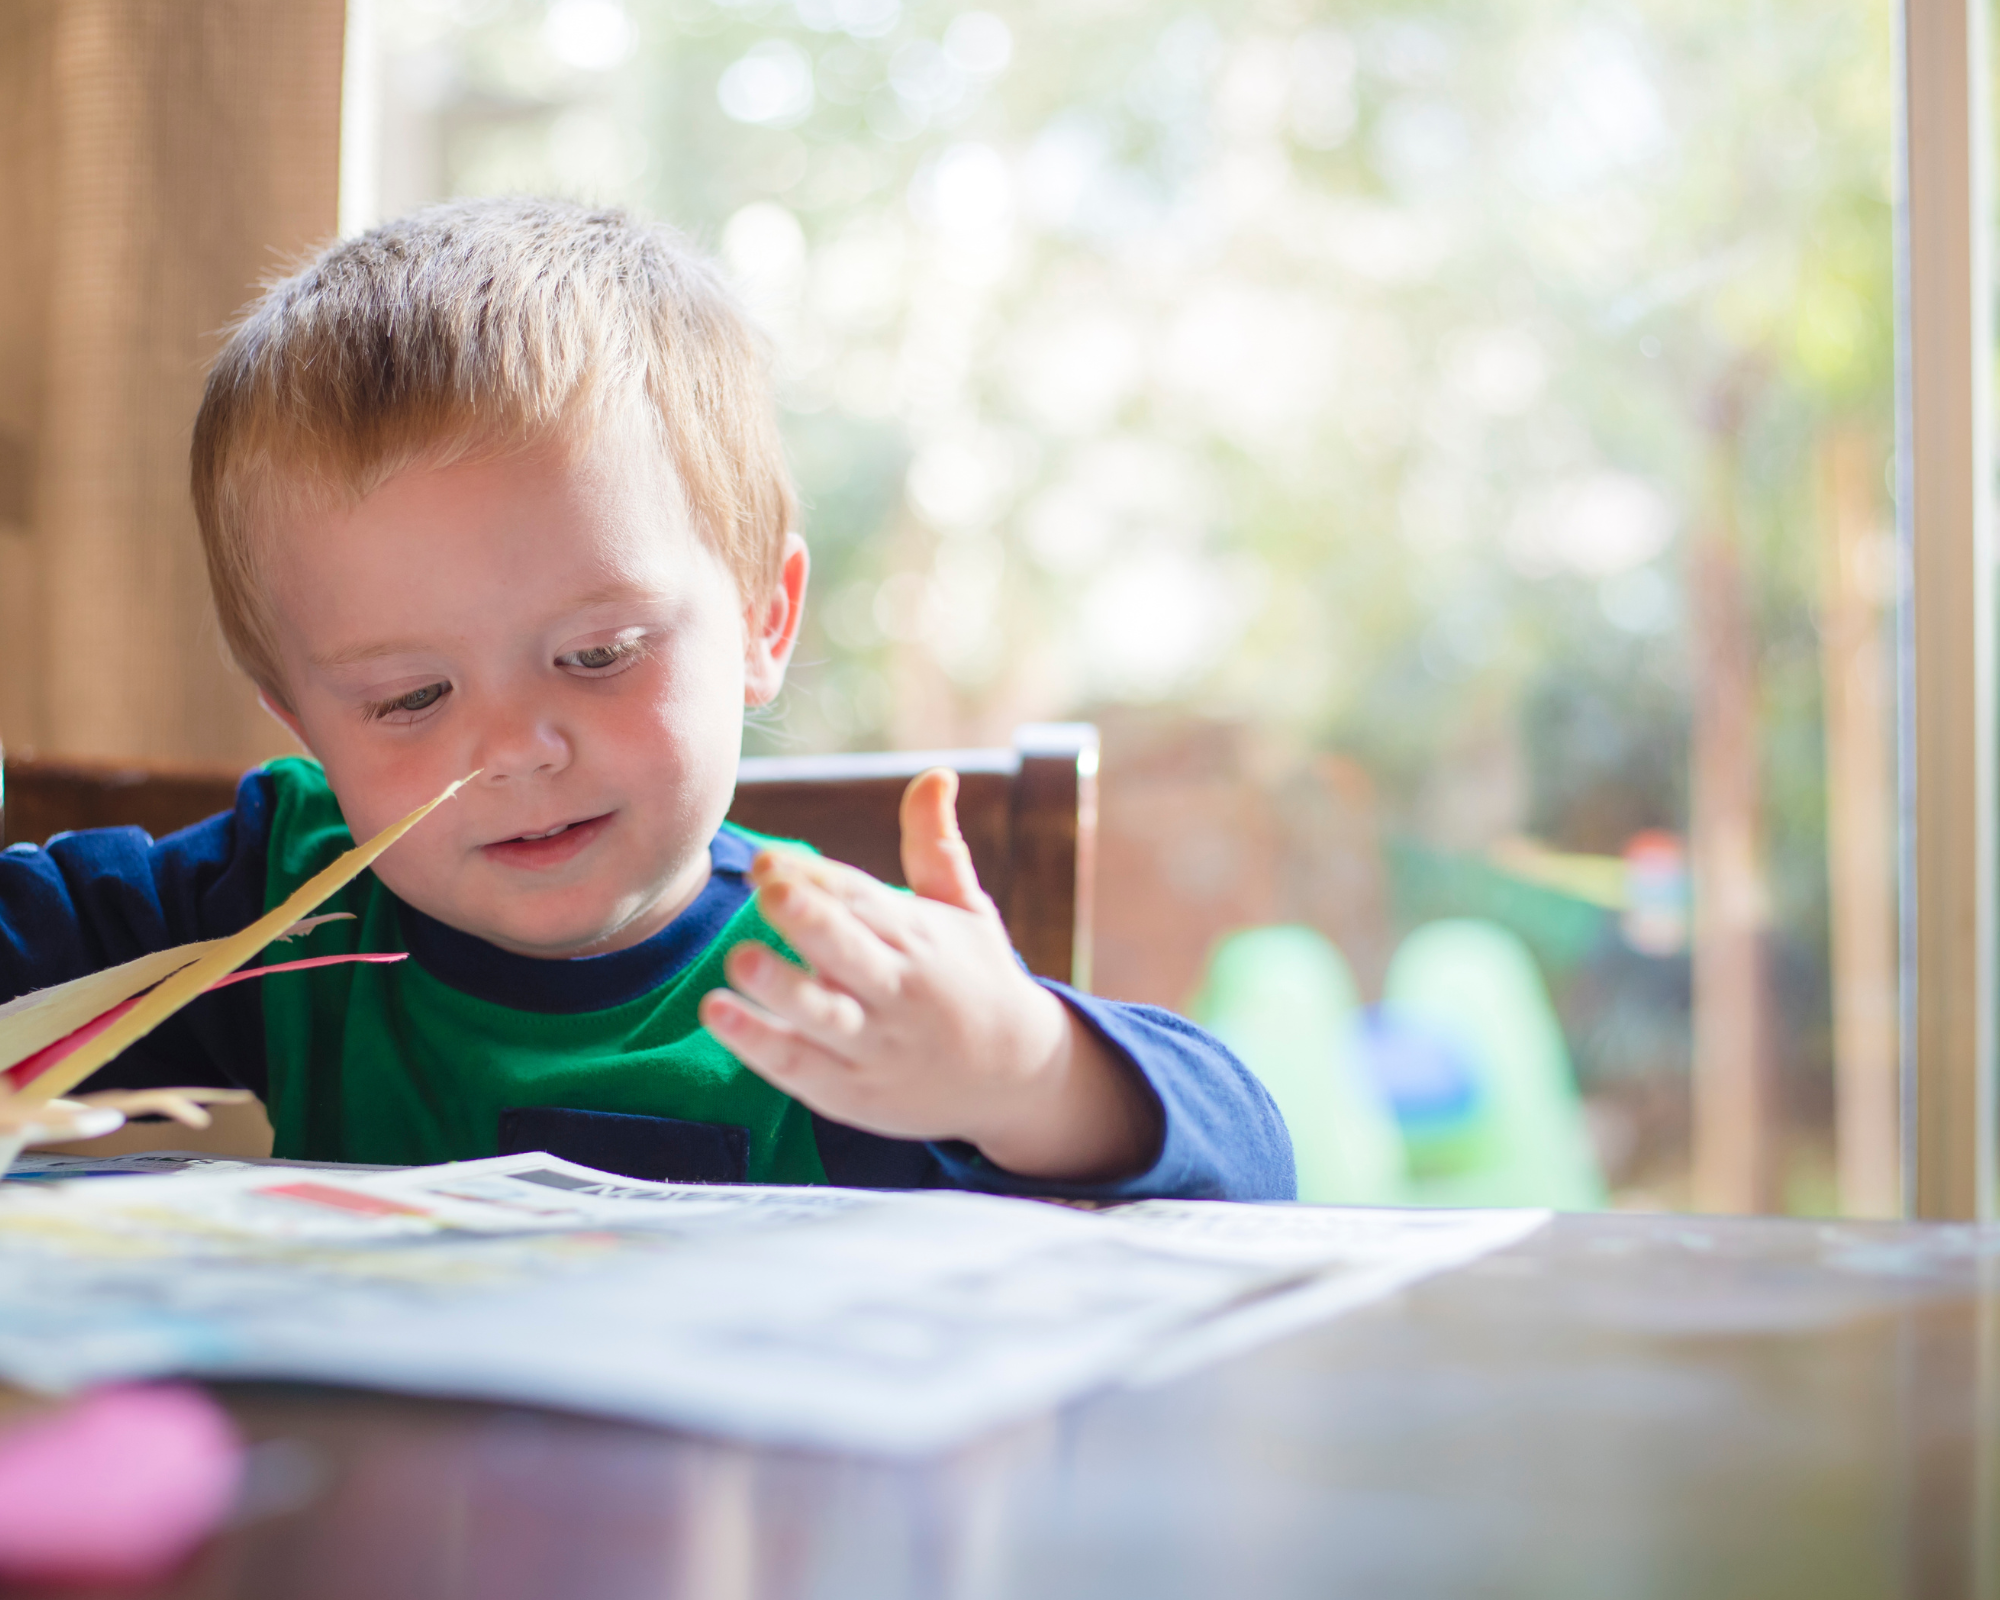 How can you introduce your toddler to learning